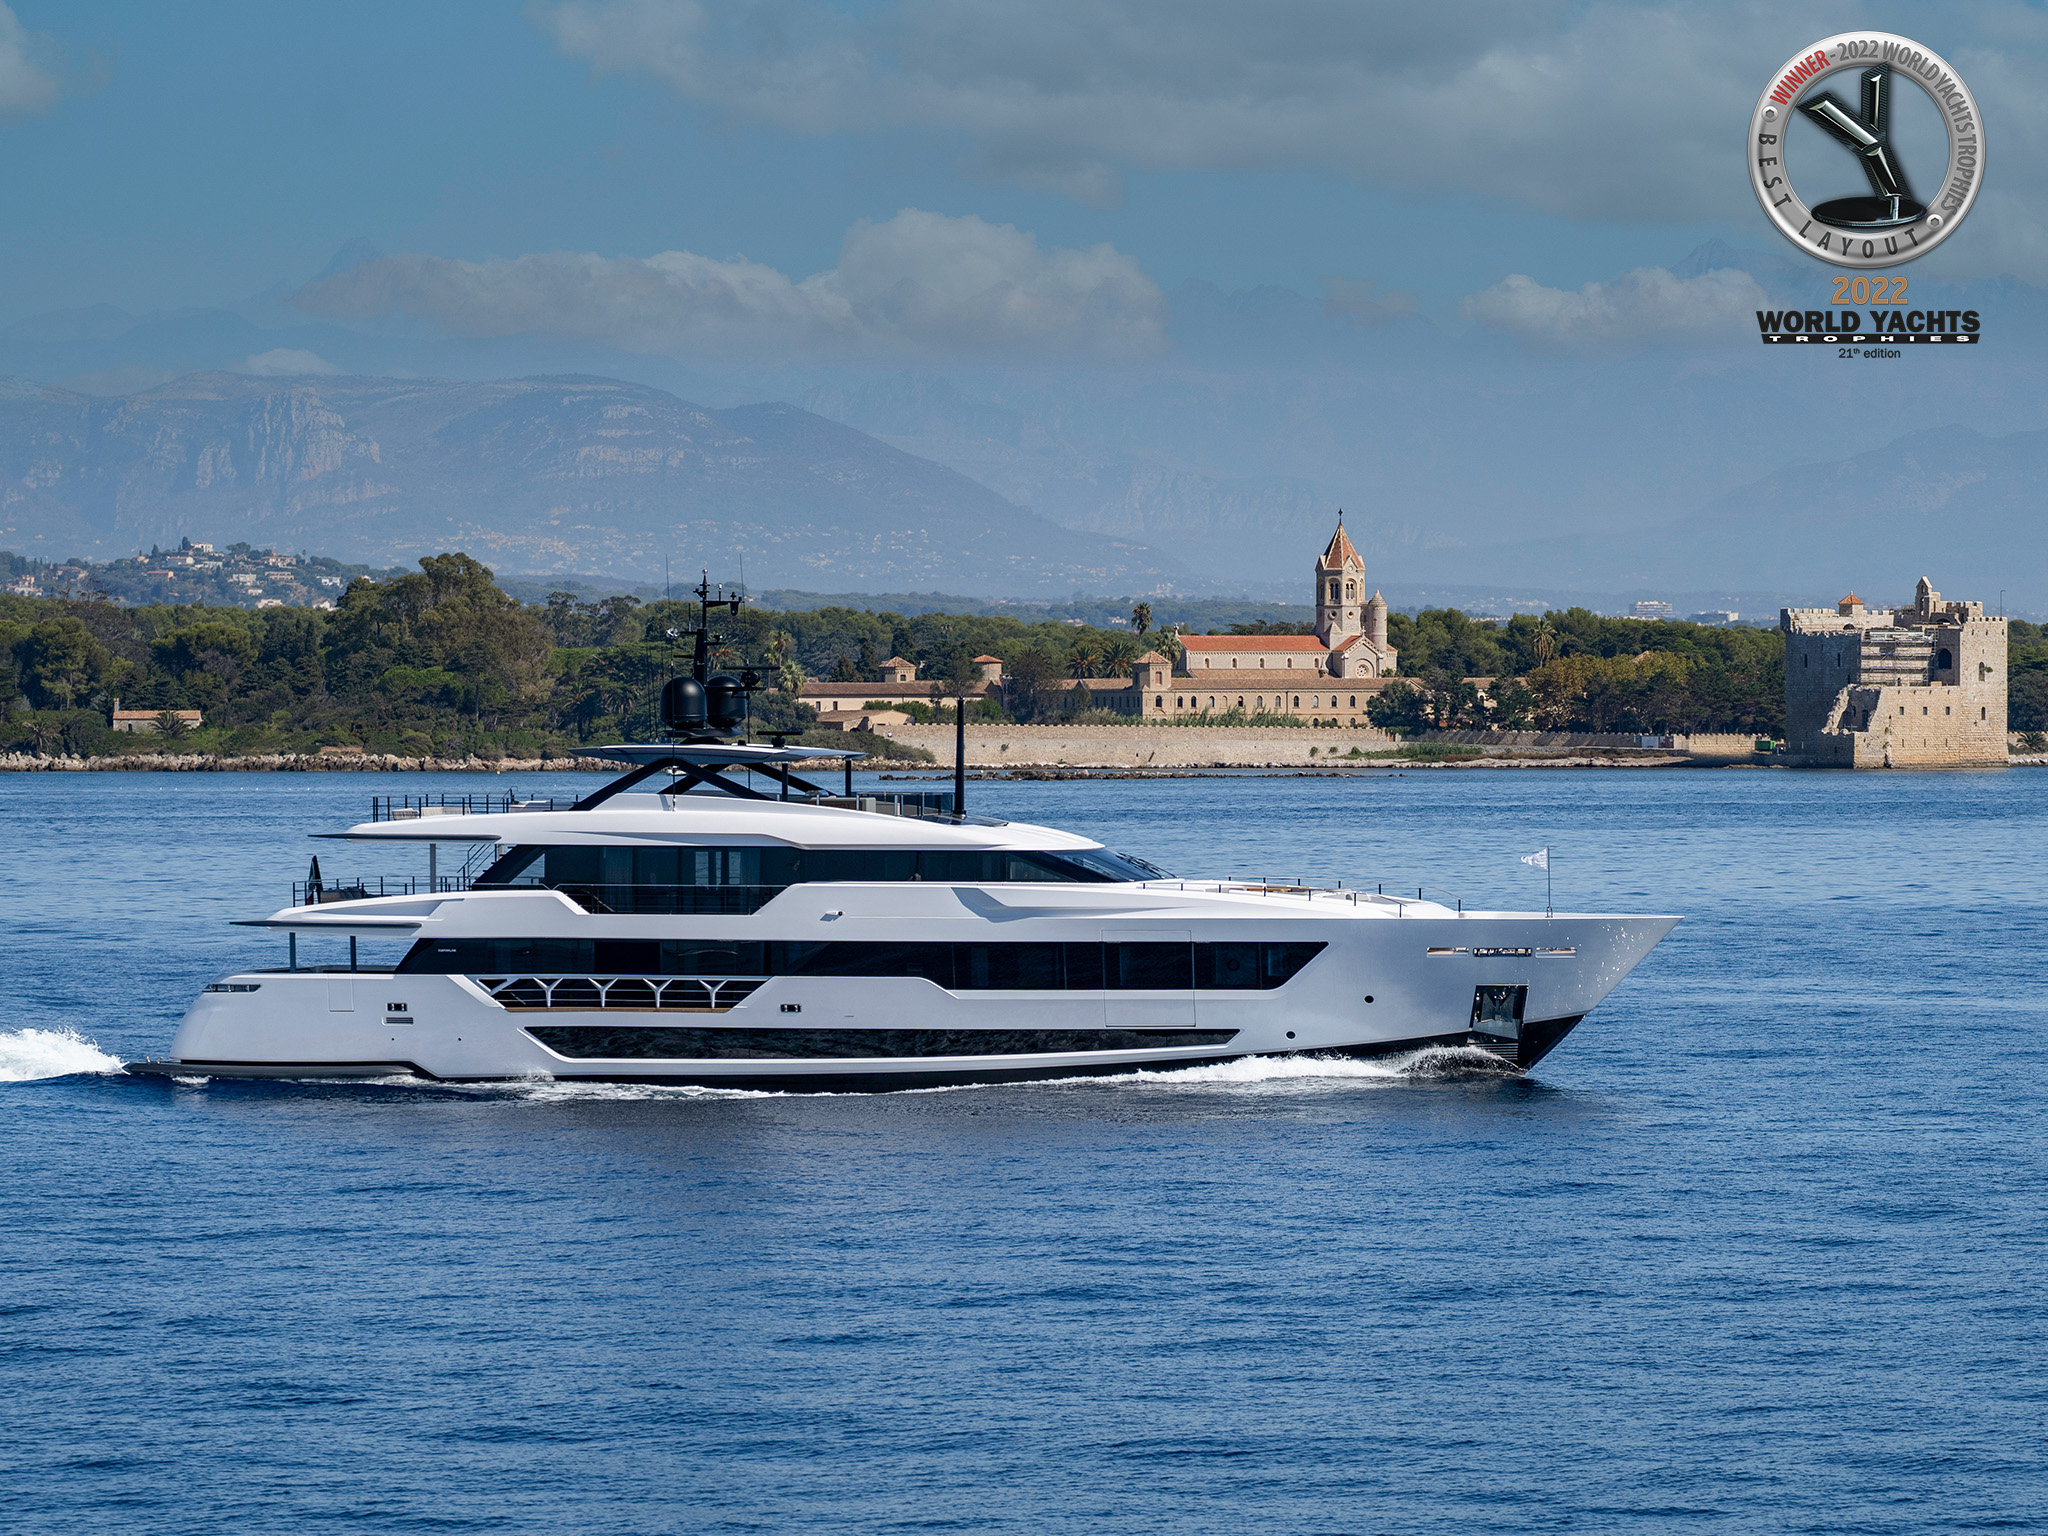 World Yachts Trophies, Asia Boating Awards and Design Innovation Awards: Ferretti Group wins at all three of these events.  